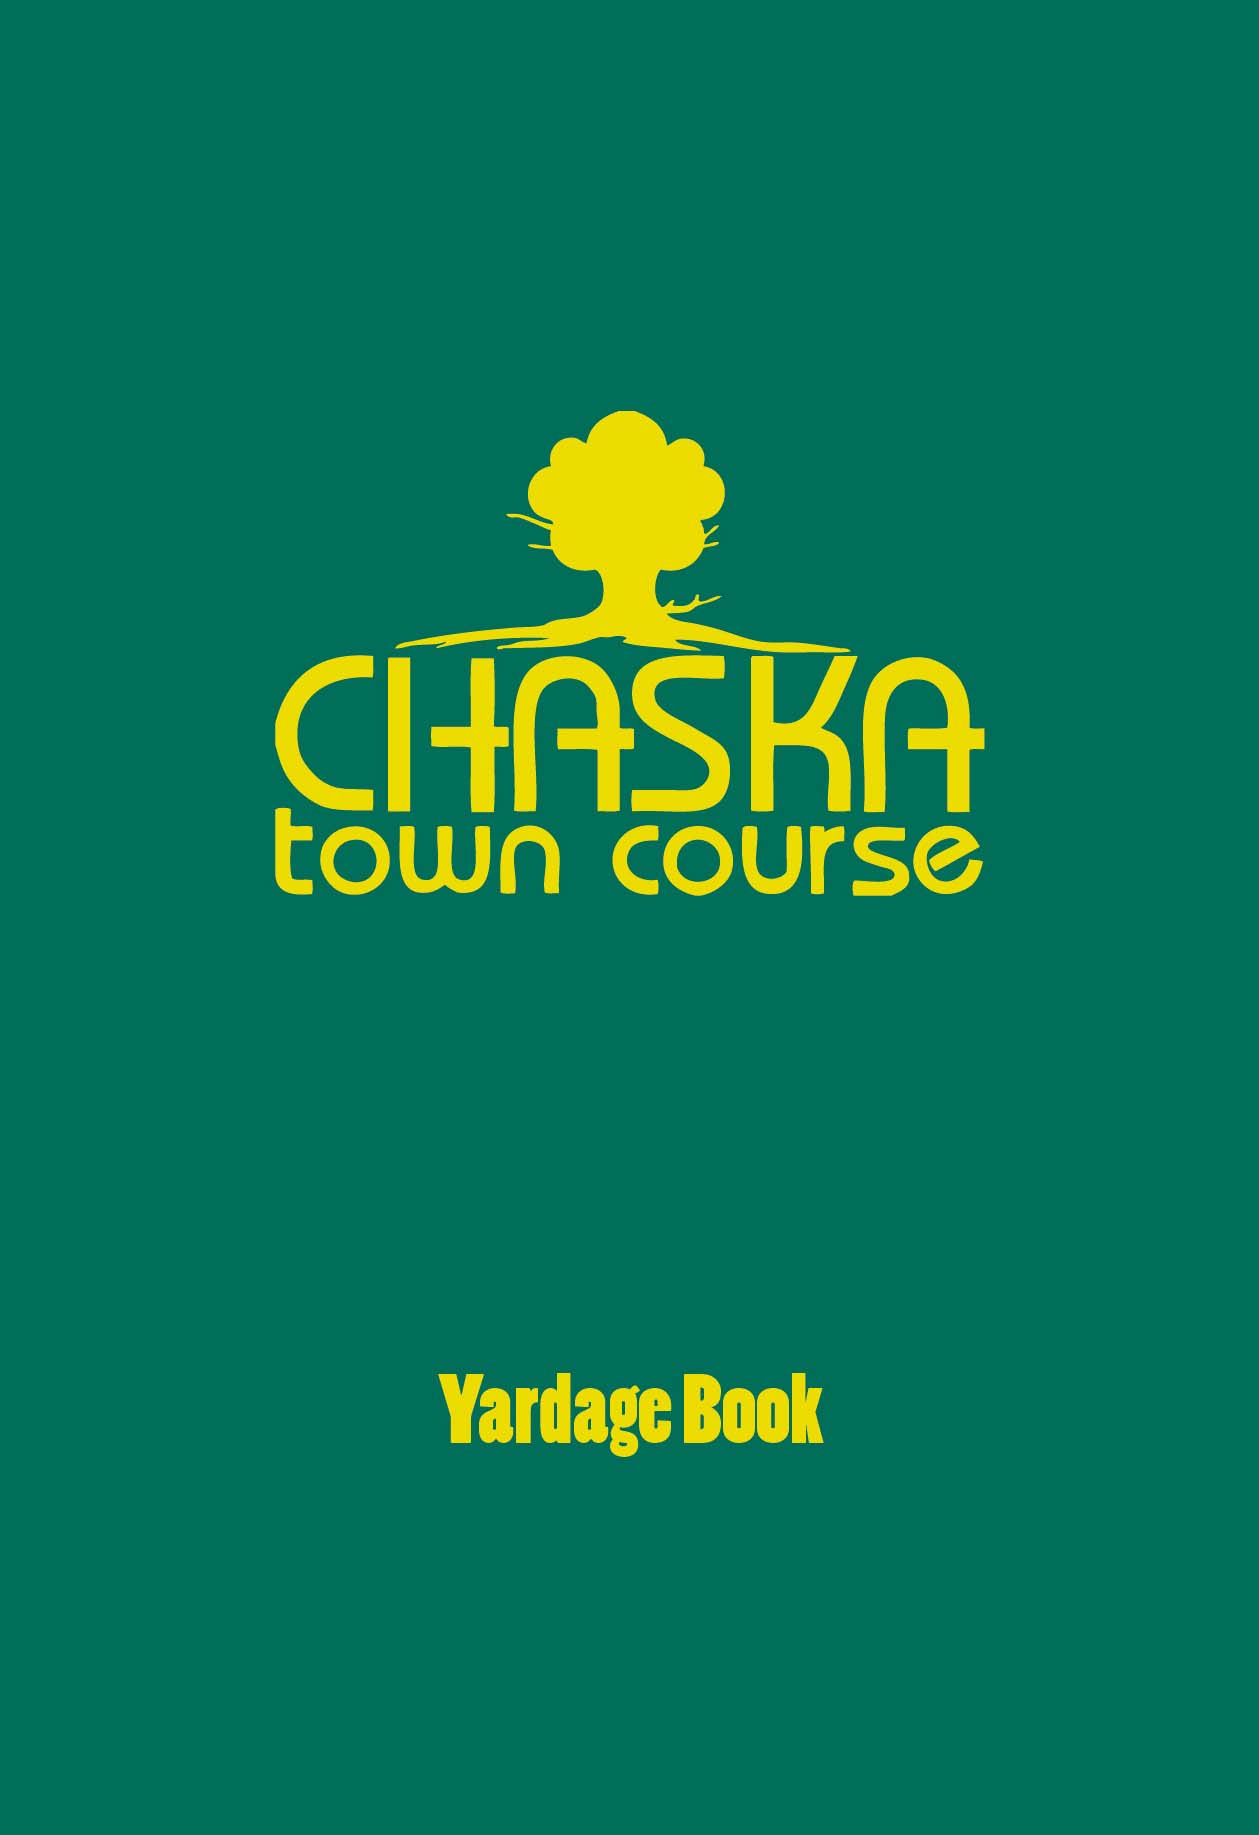 Chaska Town Course – Full Color